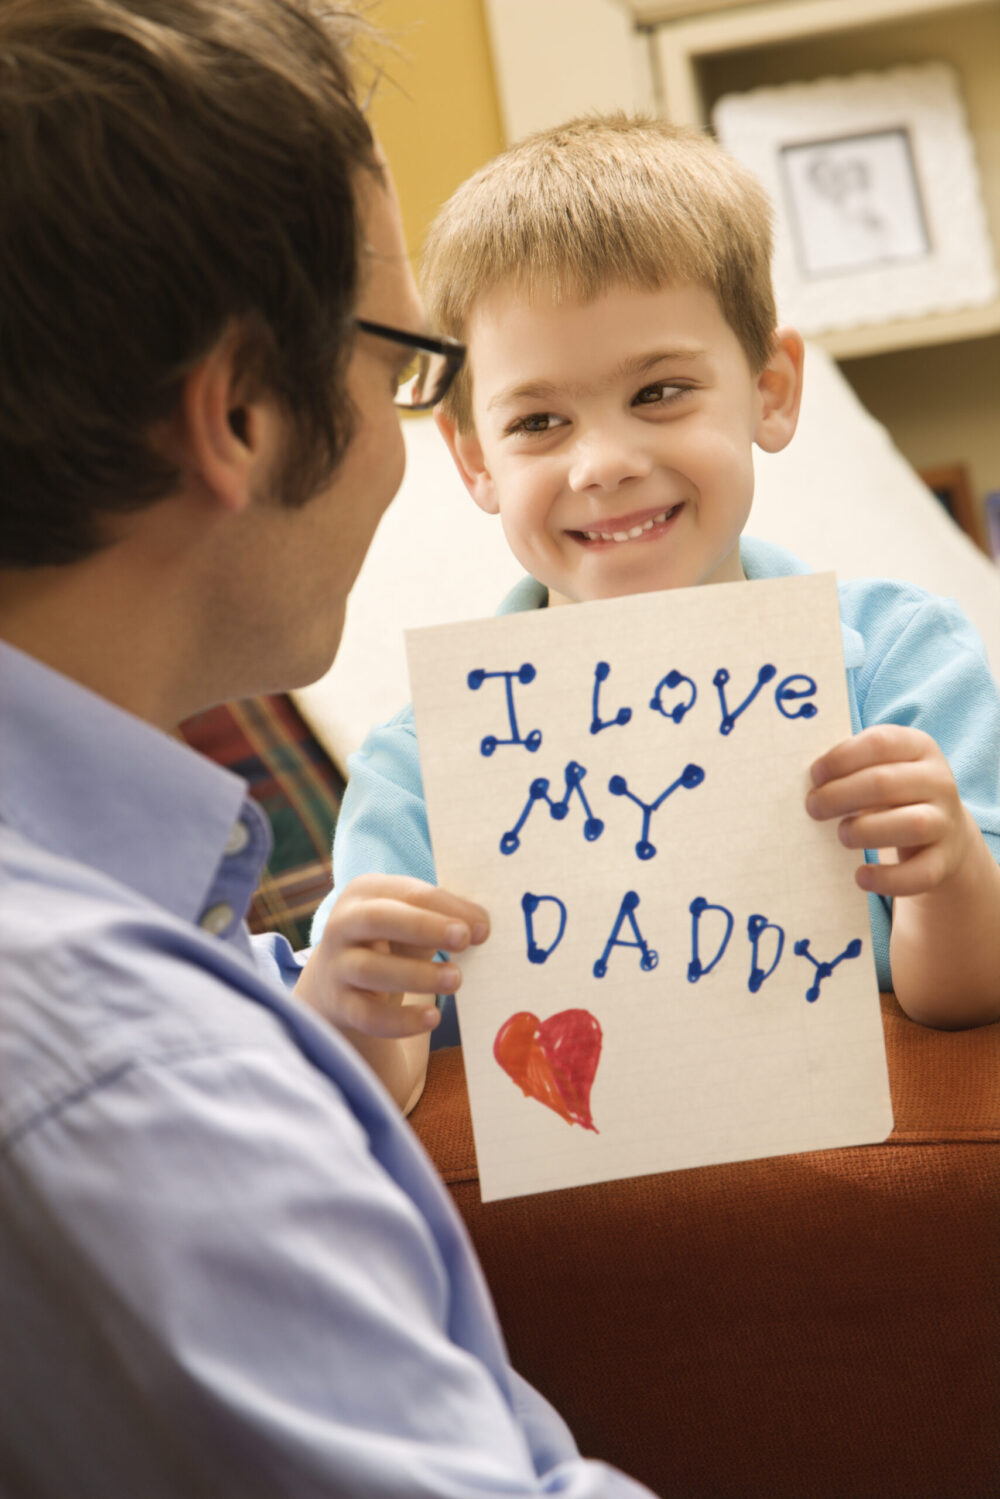 I Love My Daddy - young boy holding handmade card for his father | Nashville Christian Family Magazine